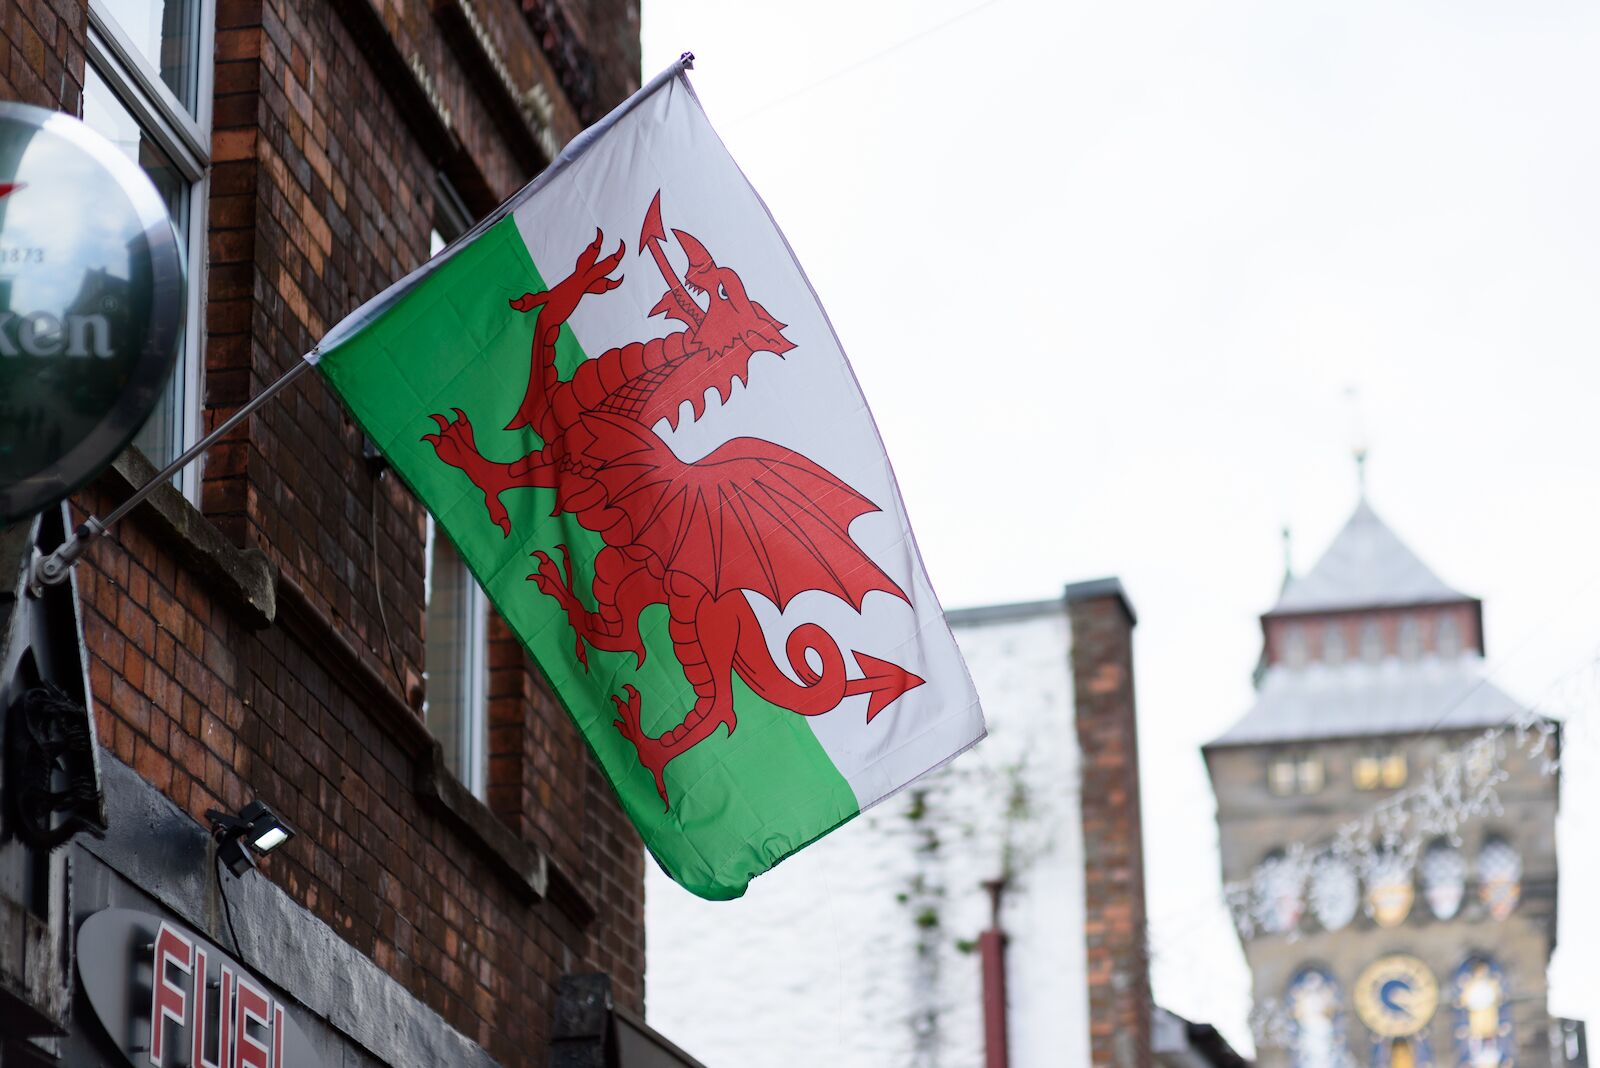 Celtic flags: Wales. The Welsh flag is white and green with a large red dragon in its center